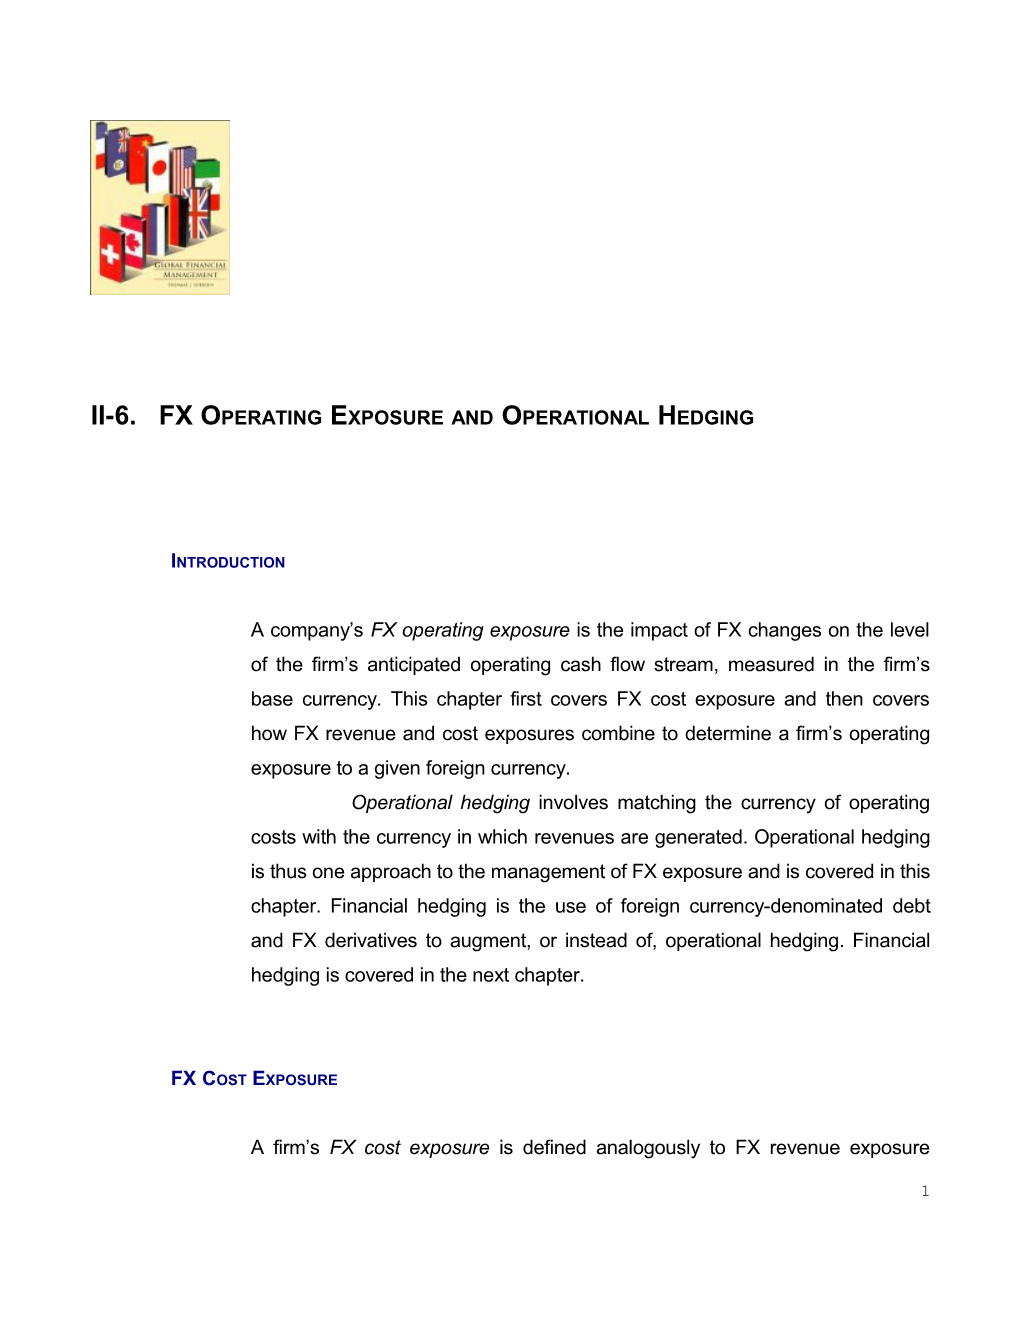 II-6. FX Operating Exposure and Operational Hedging